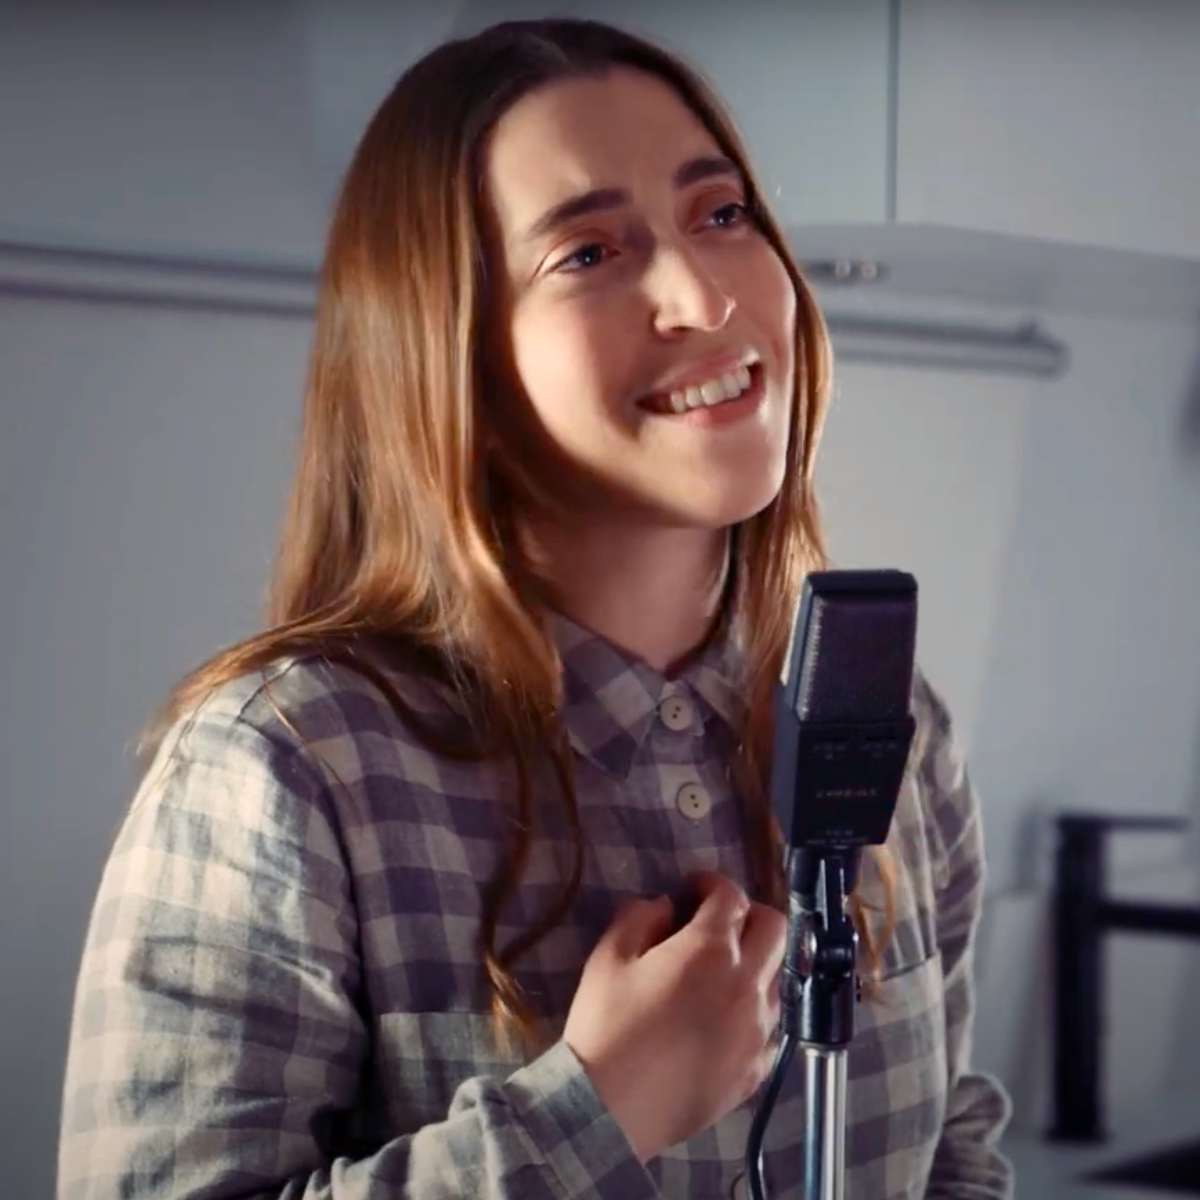 WATCH: The Sweeplings, 'Carry Me Home'